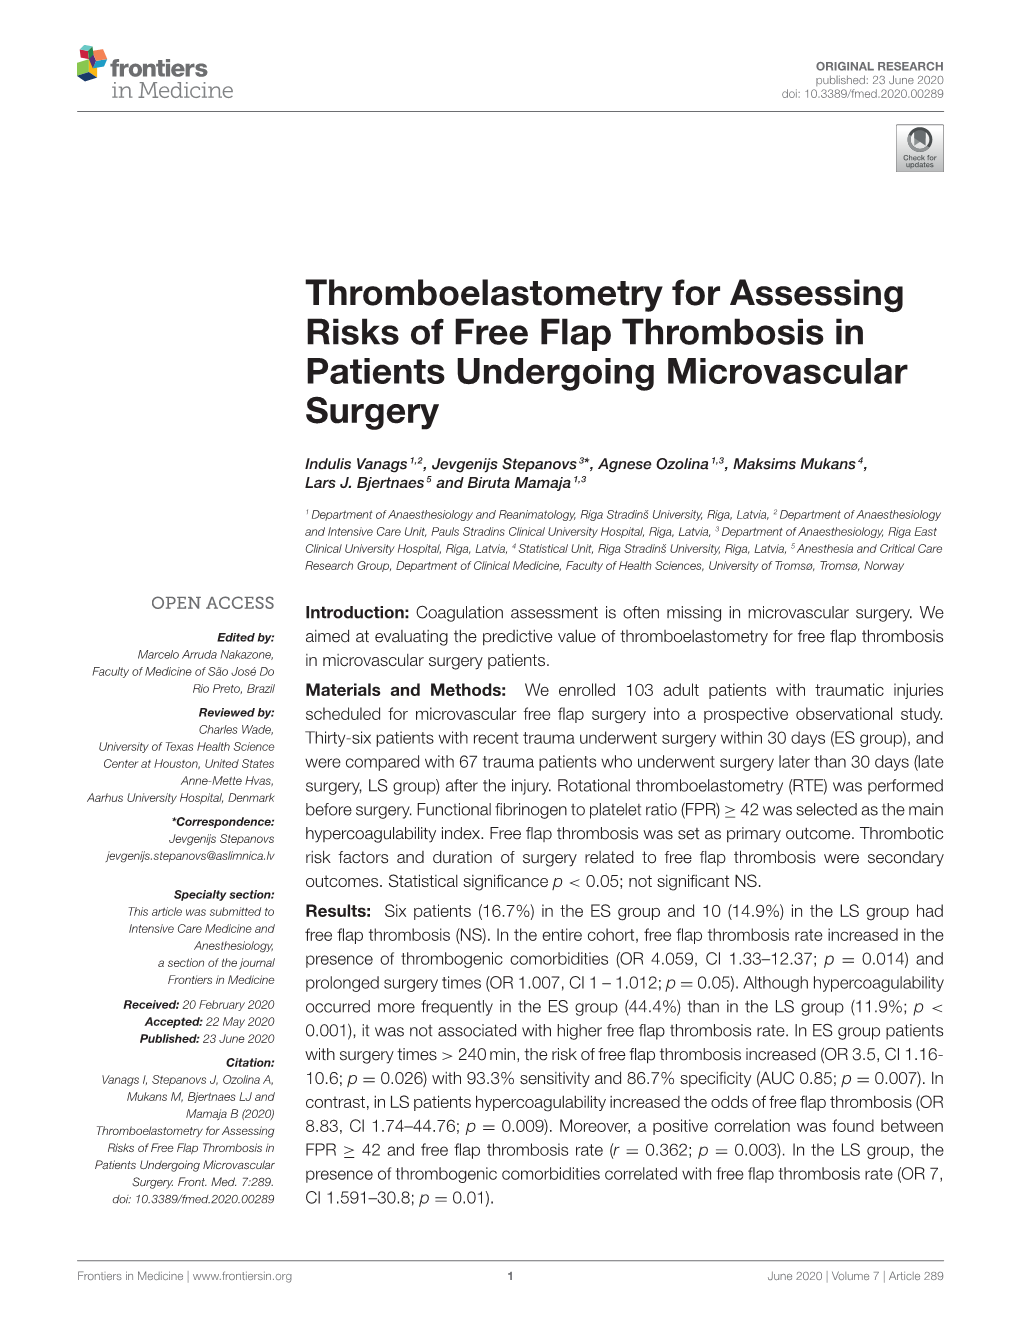 Thromboelastometry for Assessing Risks of Free Flap Thrombosis in Patients Undergoing Microvascular Surgery